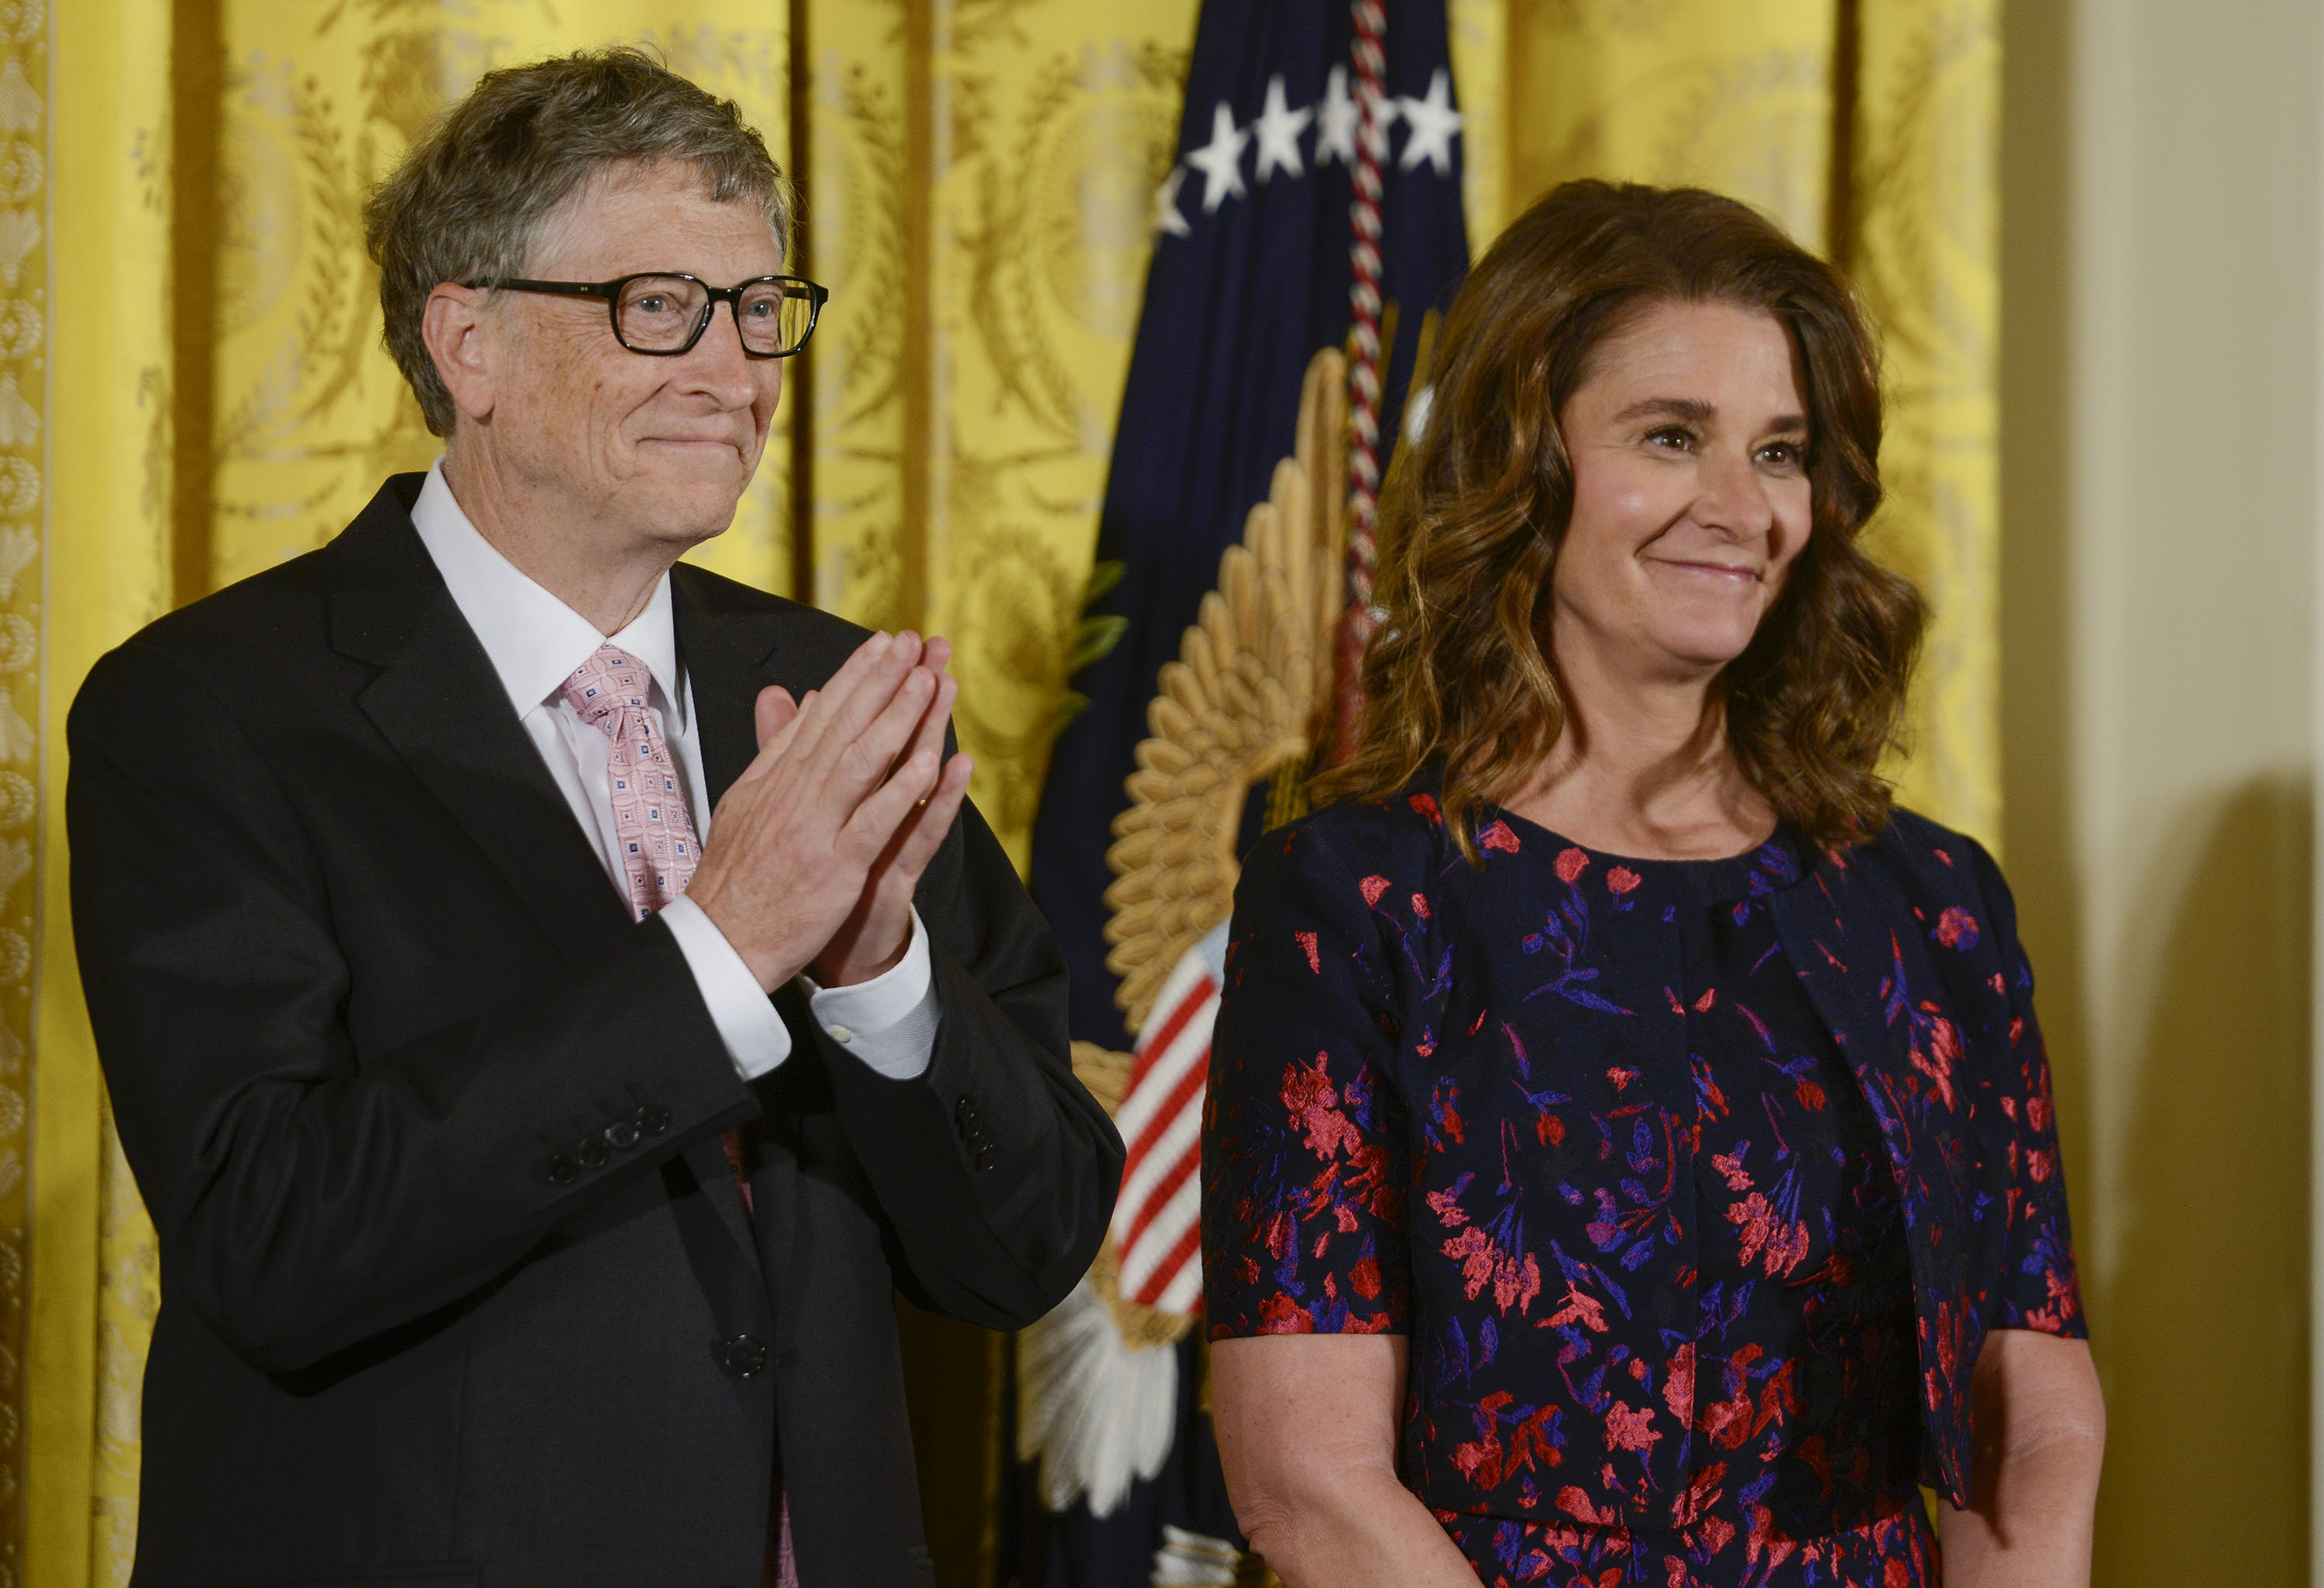 Bill and Melinda Gates are presented with the 2016 Presidential Medal Of Freedom by President Obama at White House on Nov. 22, 2016 in Washington, D.C. (Leigh Vogel/WireImage)